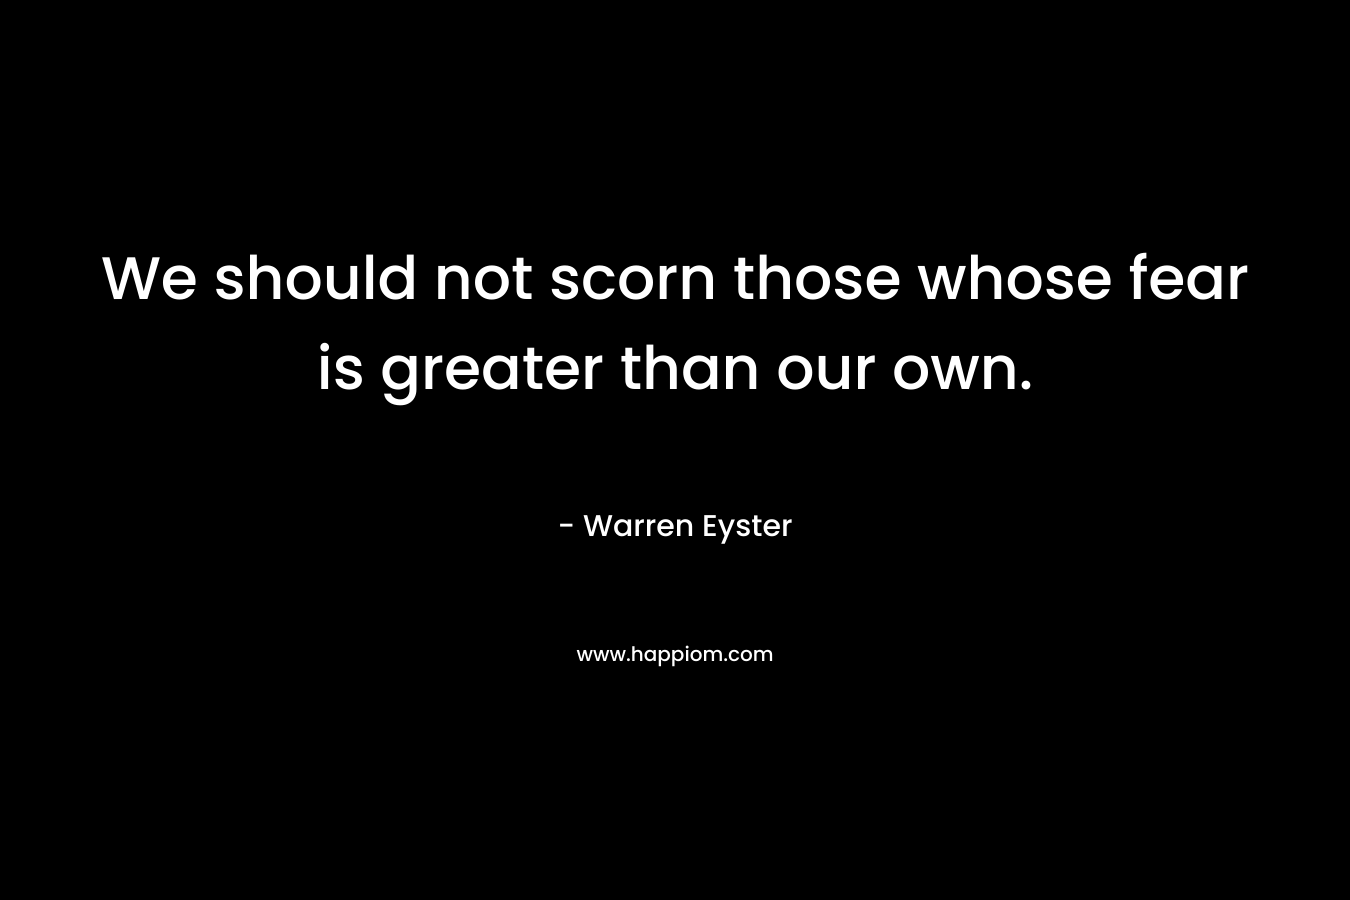 We should not scorn those whose fear is greater than our own.